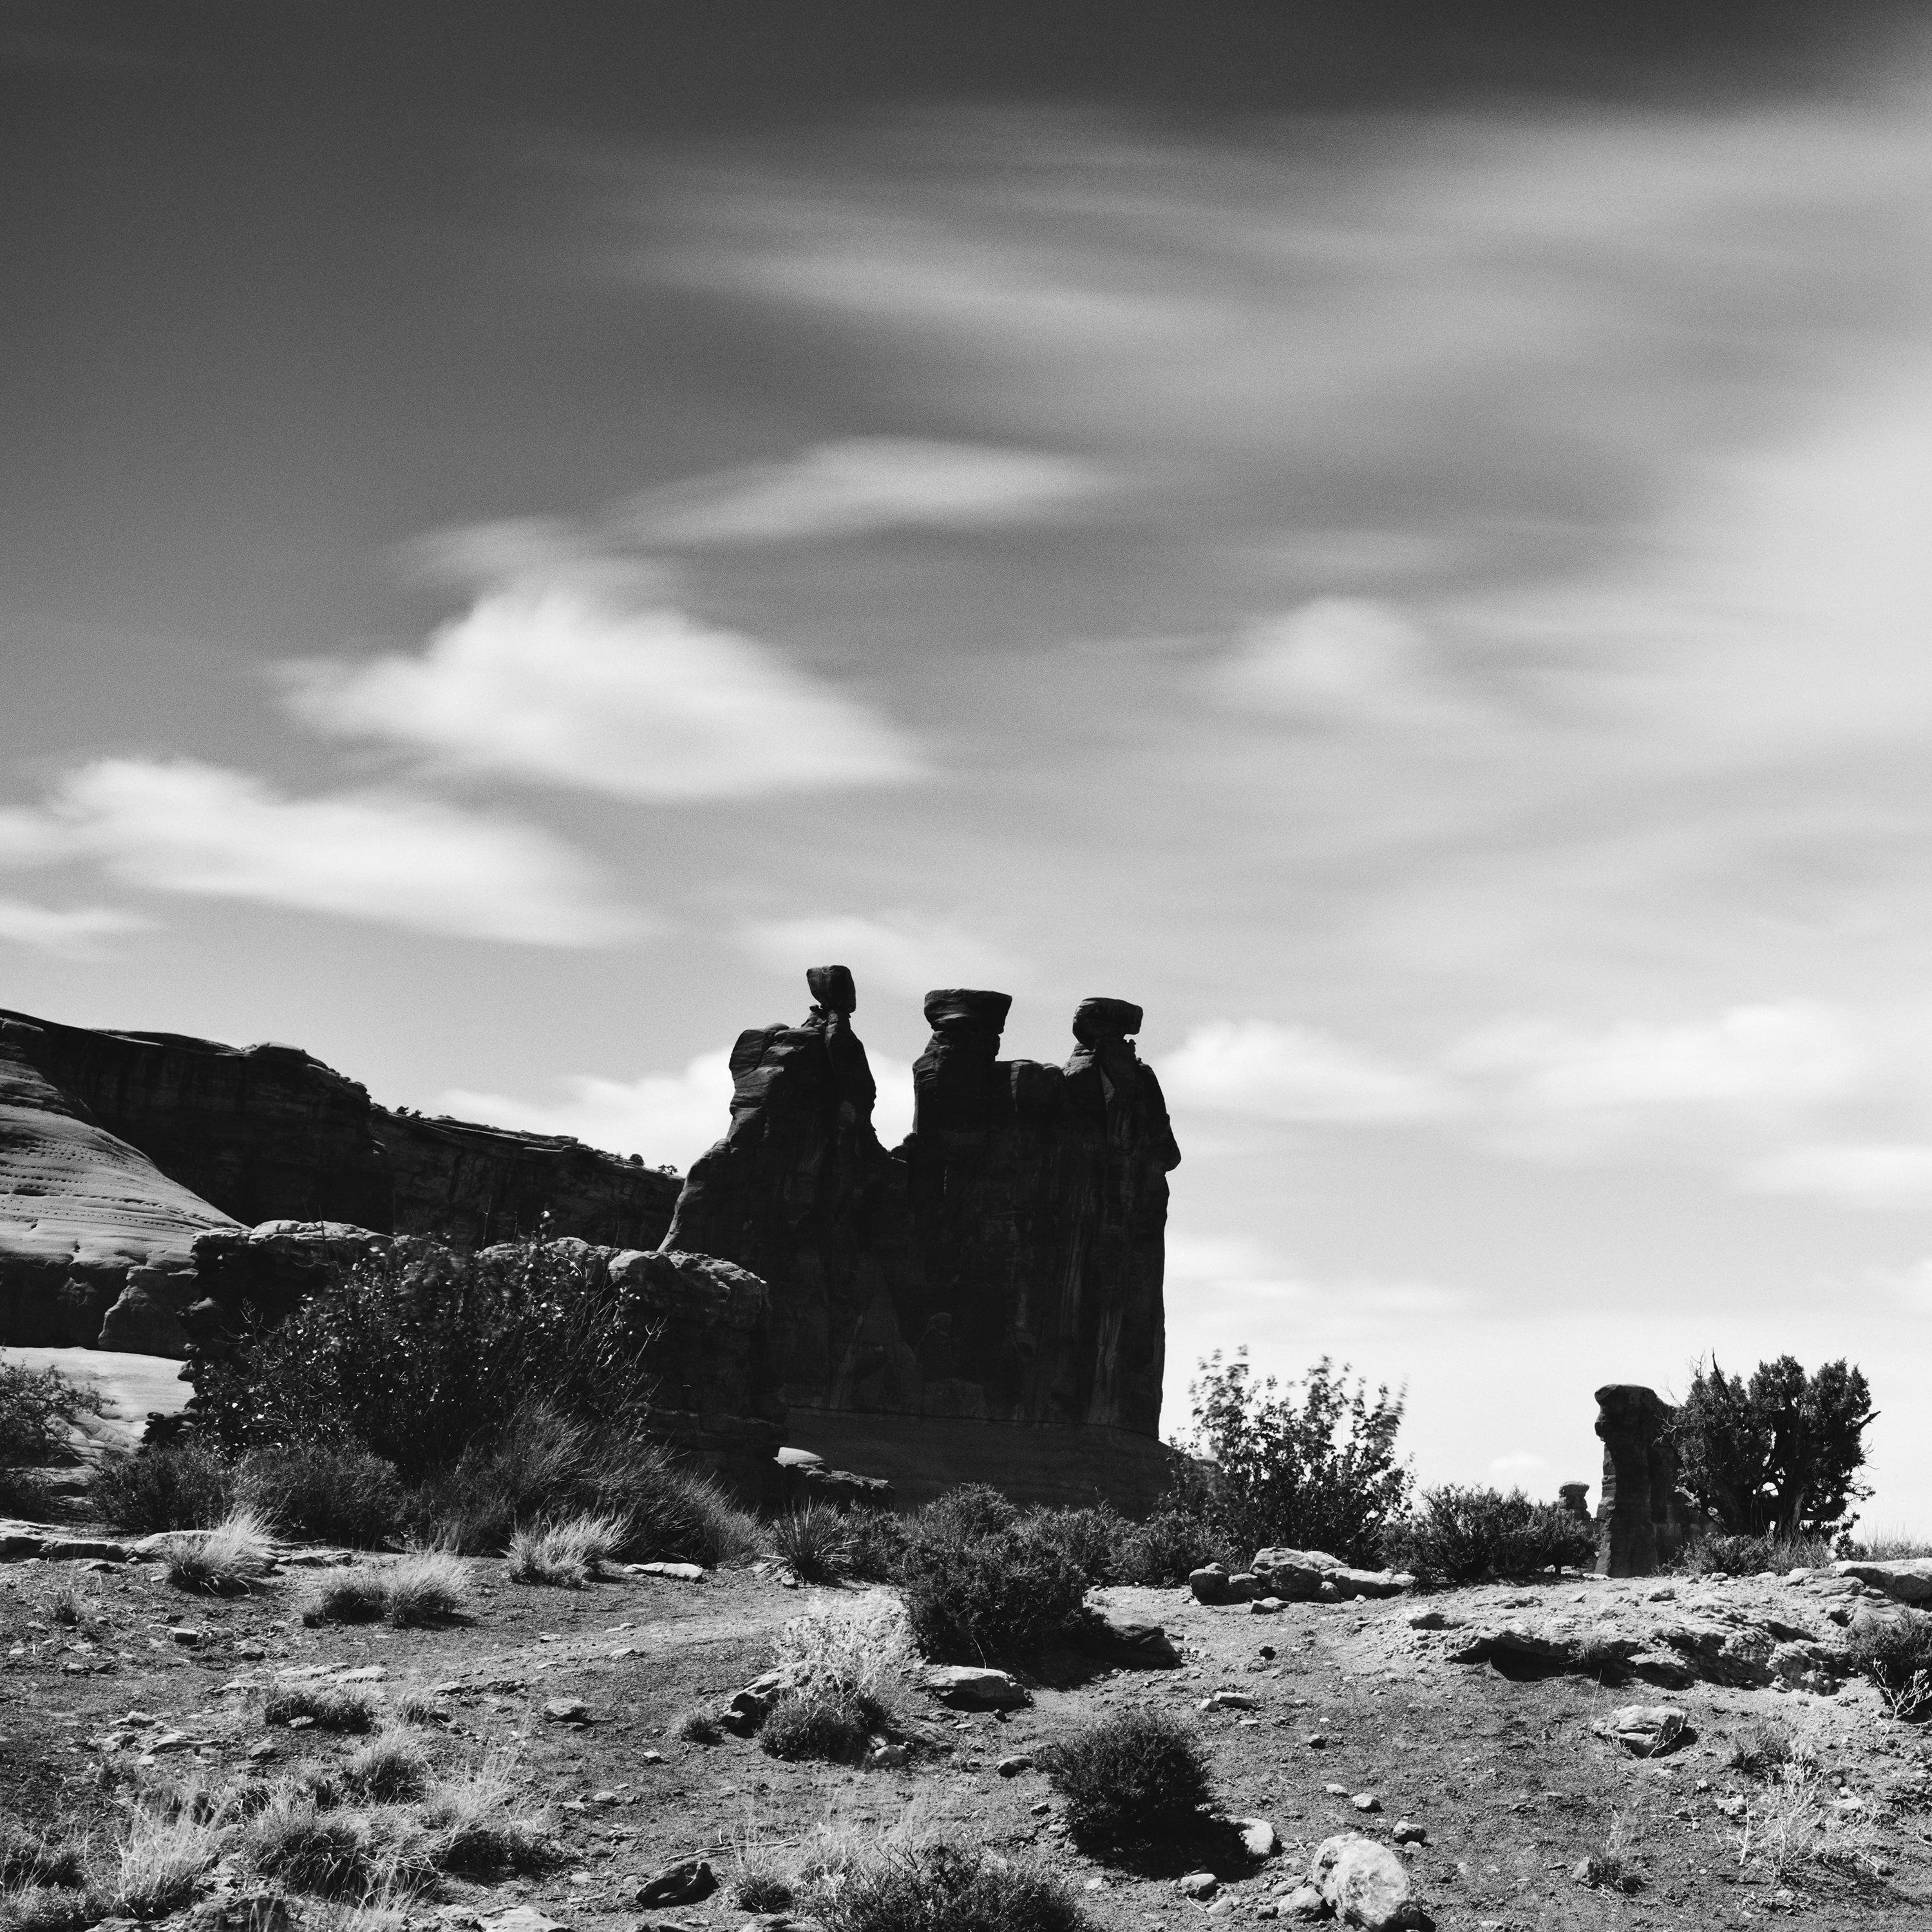 Black and White Fine Art landscape panorama photography - Wild West Panorama, Arches National Park, Utah, USA. Archival pigment ink print, edition of 7. Signed, titled, dated and numbered by artist. Certificate of authenticity included. Printed with